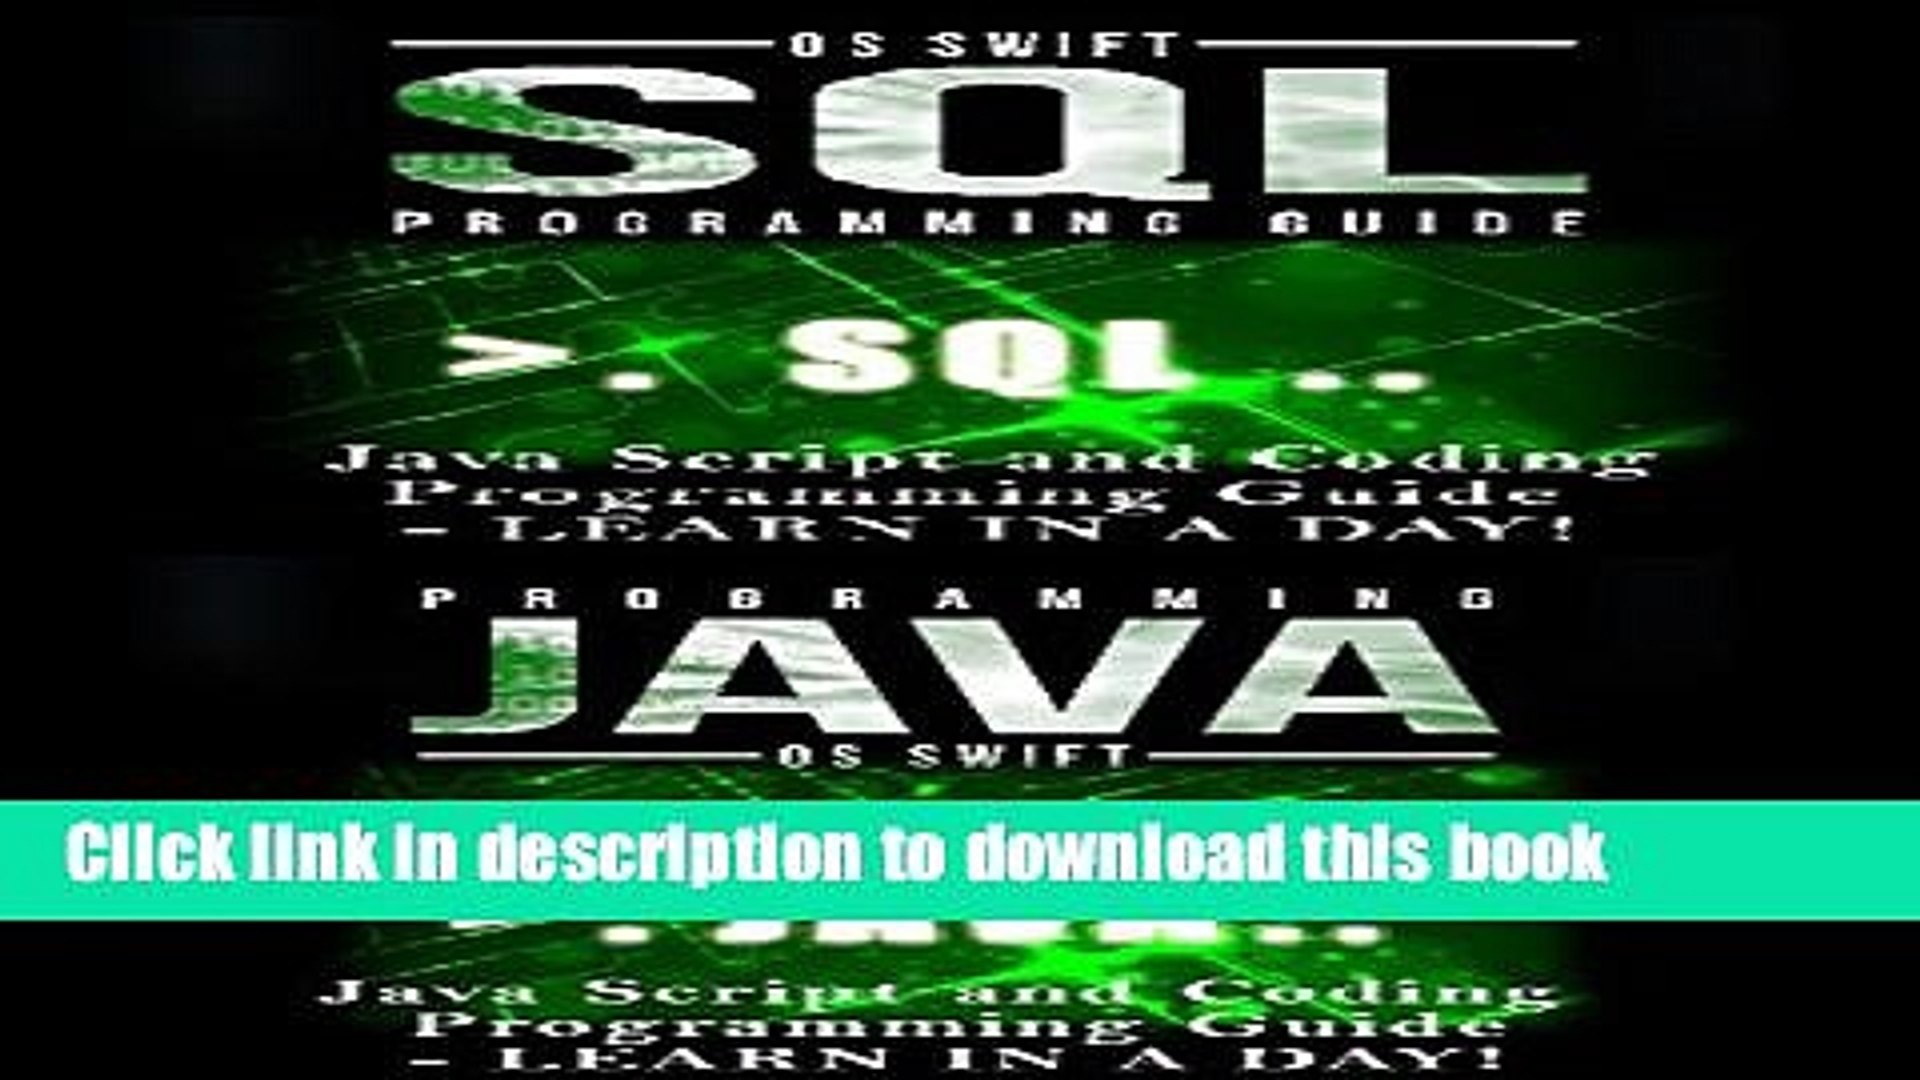 Download JAVA, JAVA Script and SQL:  Programming Guide: Learn In A Day! (Java, Swift, Apps,